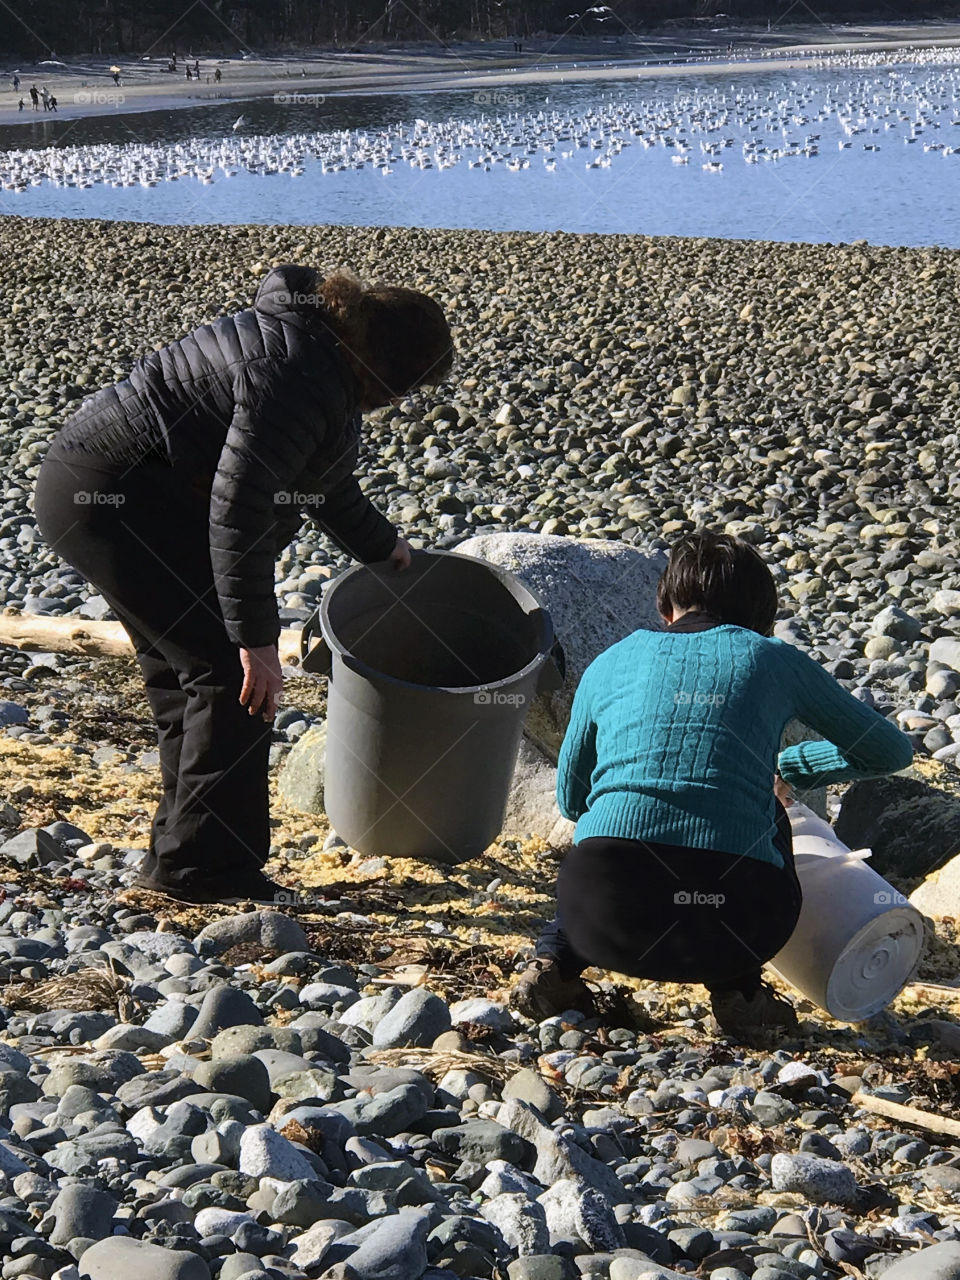 In the Herring Industry, nothing goes to waste. The birds are more interested in the fresh roe but these 2 women know there are still plenty of nutrients for their gardens & are gathering the dried roe to feed the earth that will grow their food. 